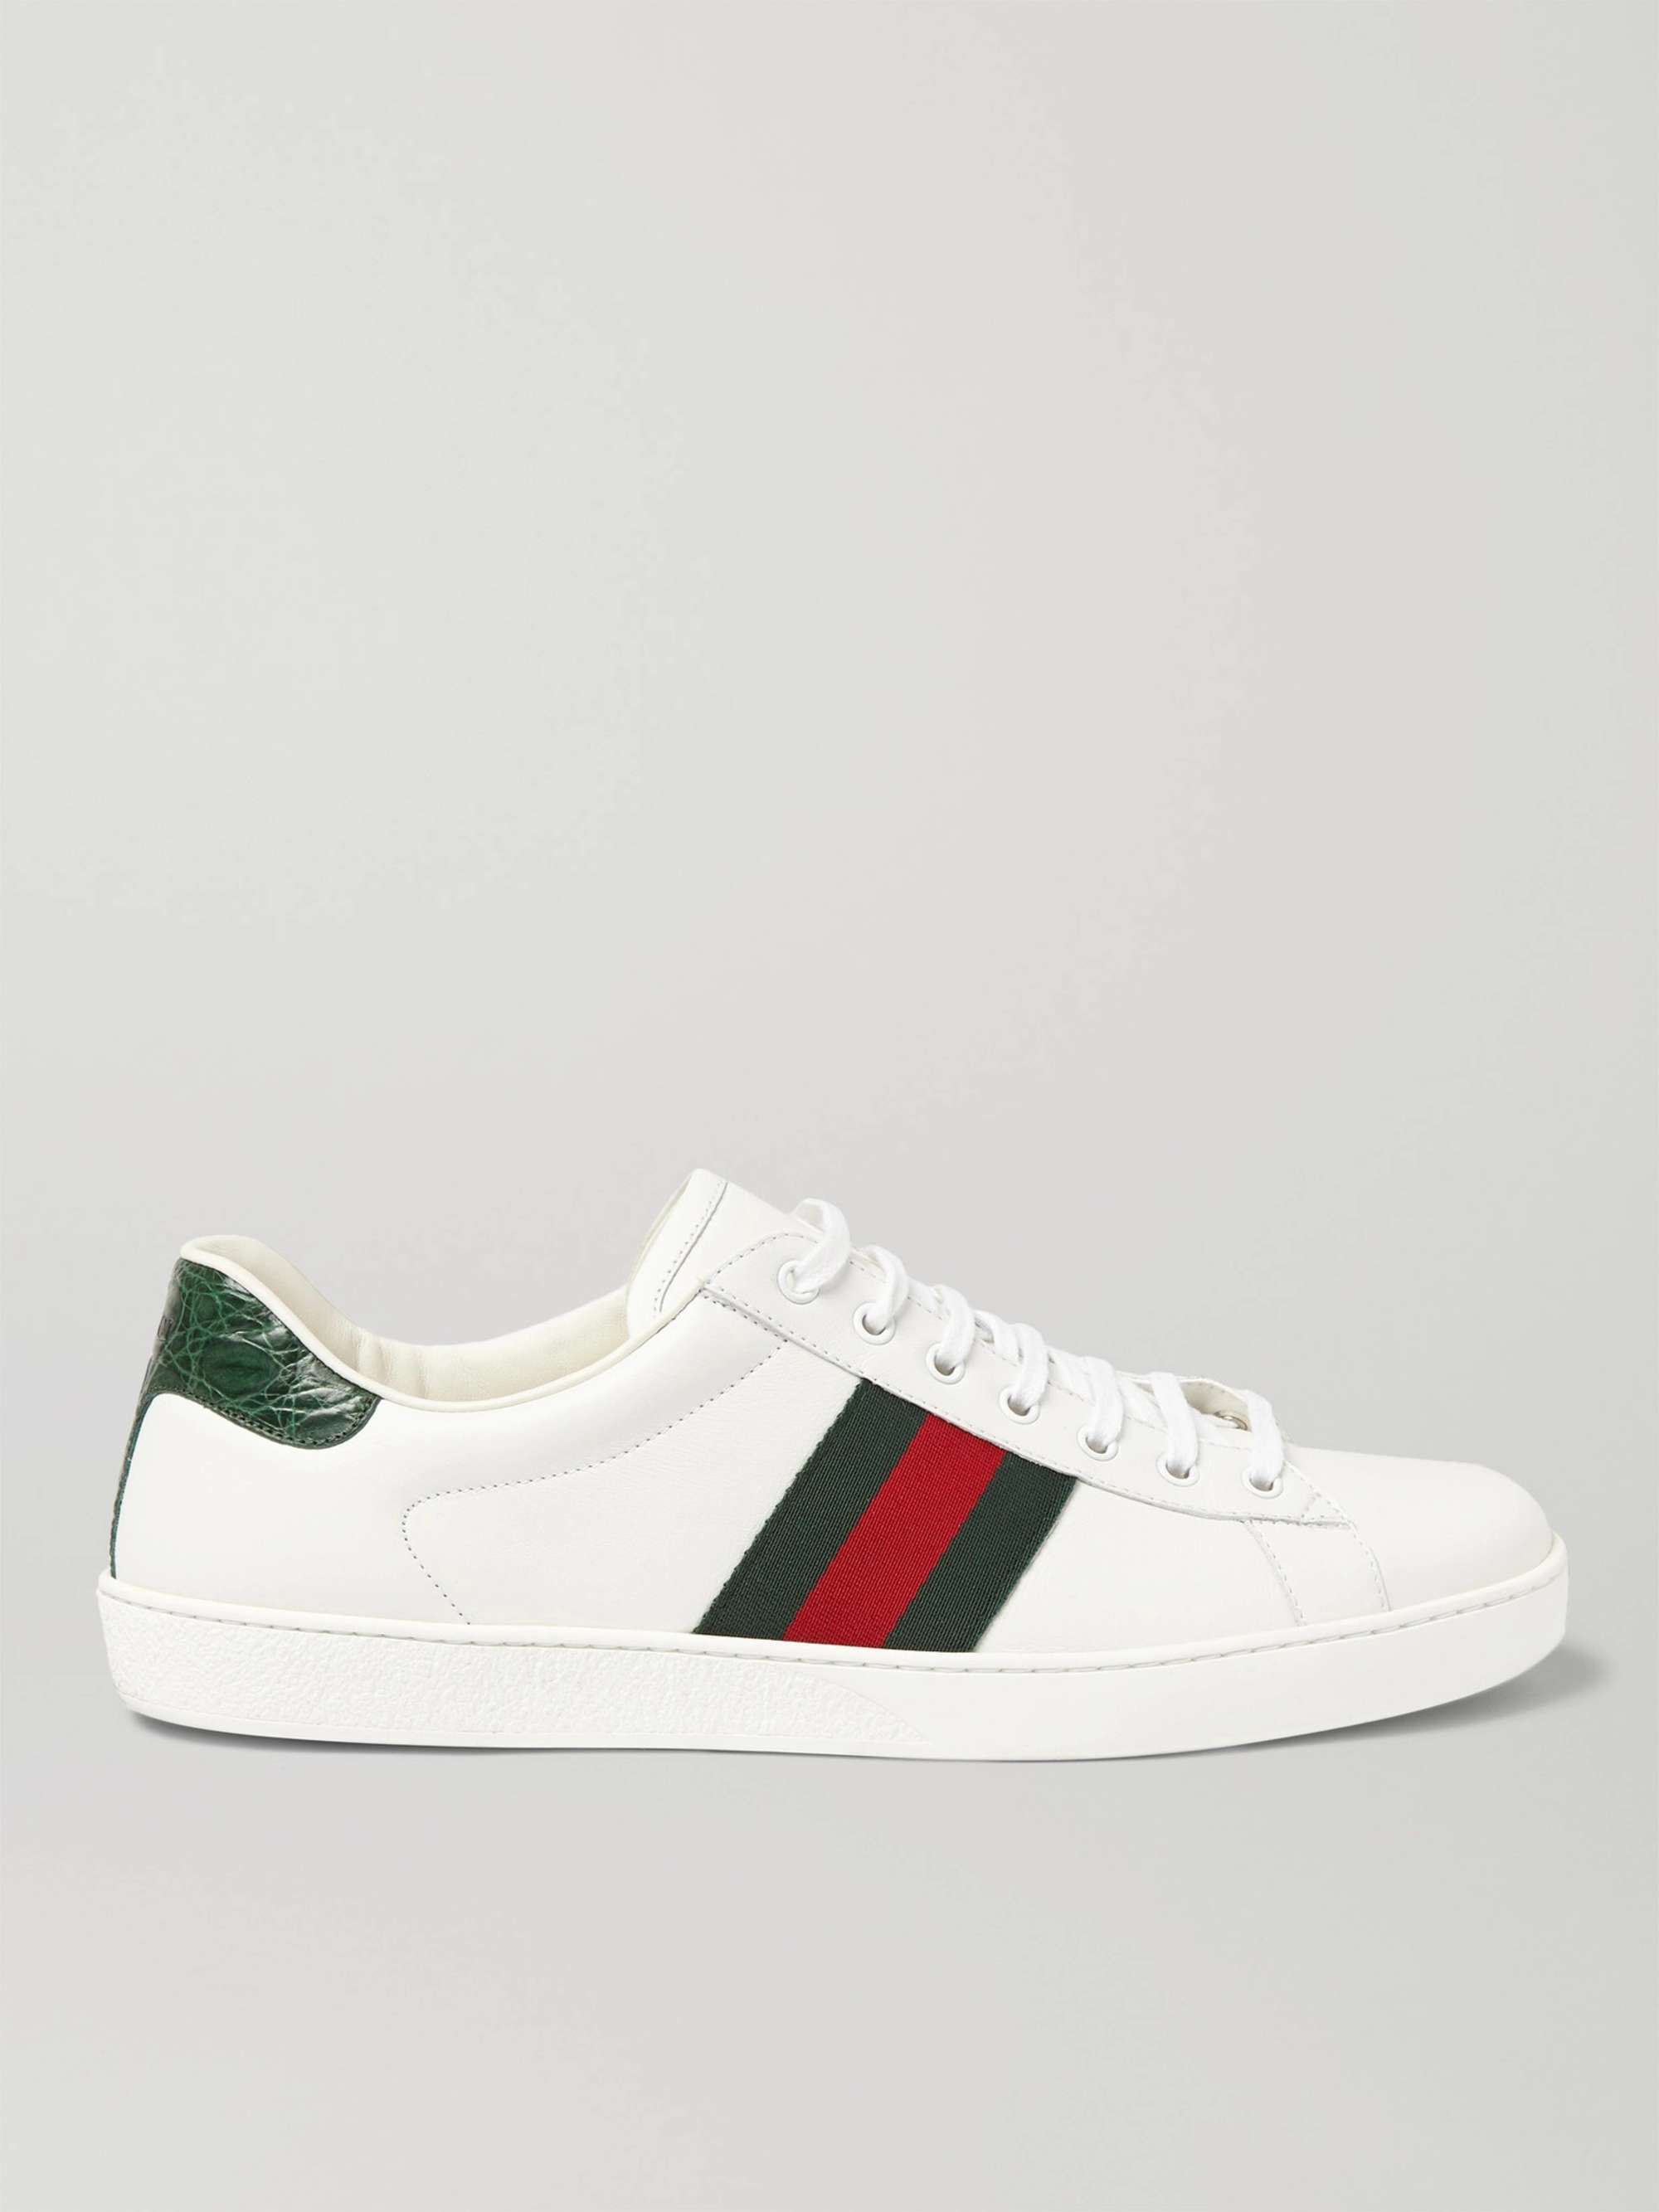 White Ace Crocodile-Trimmed Leather Sneakers | GUCCI | MR PORTER